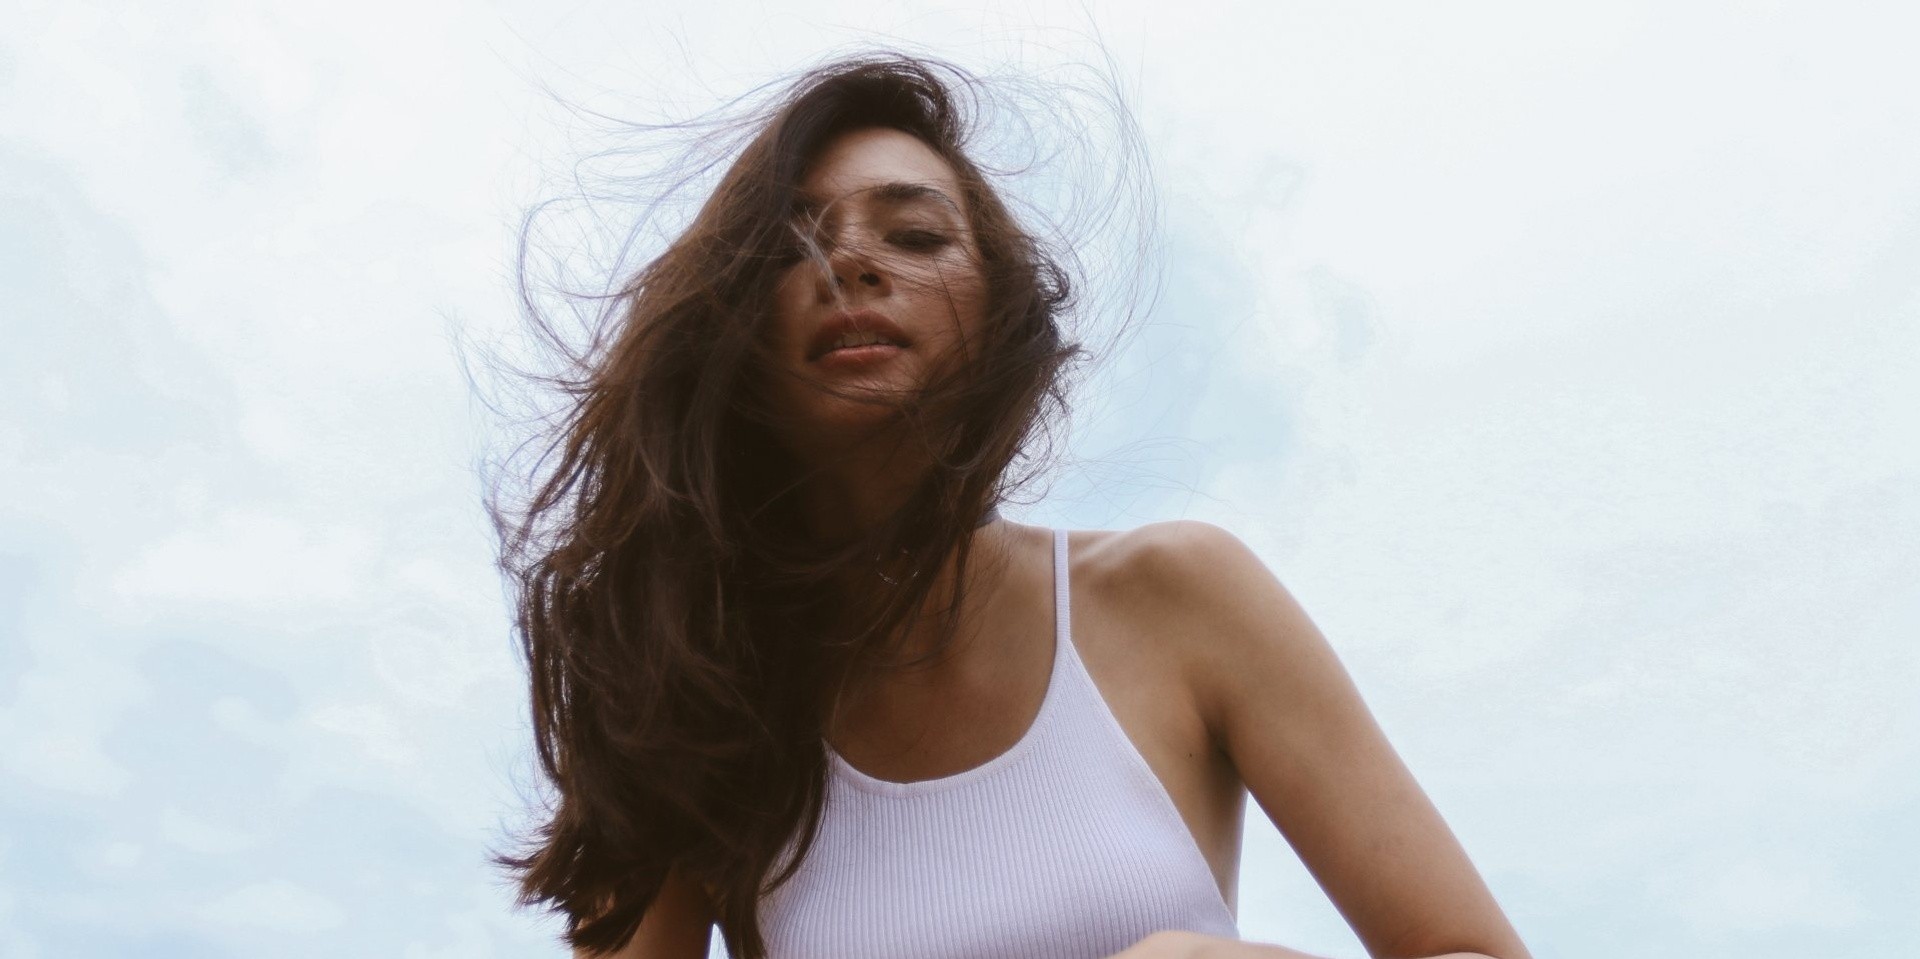 "It's a great time for music in Asia – it's a good time to bring something new": An interview with Valentina Ploy